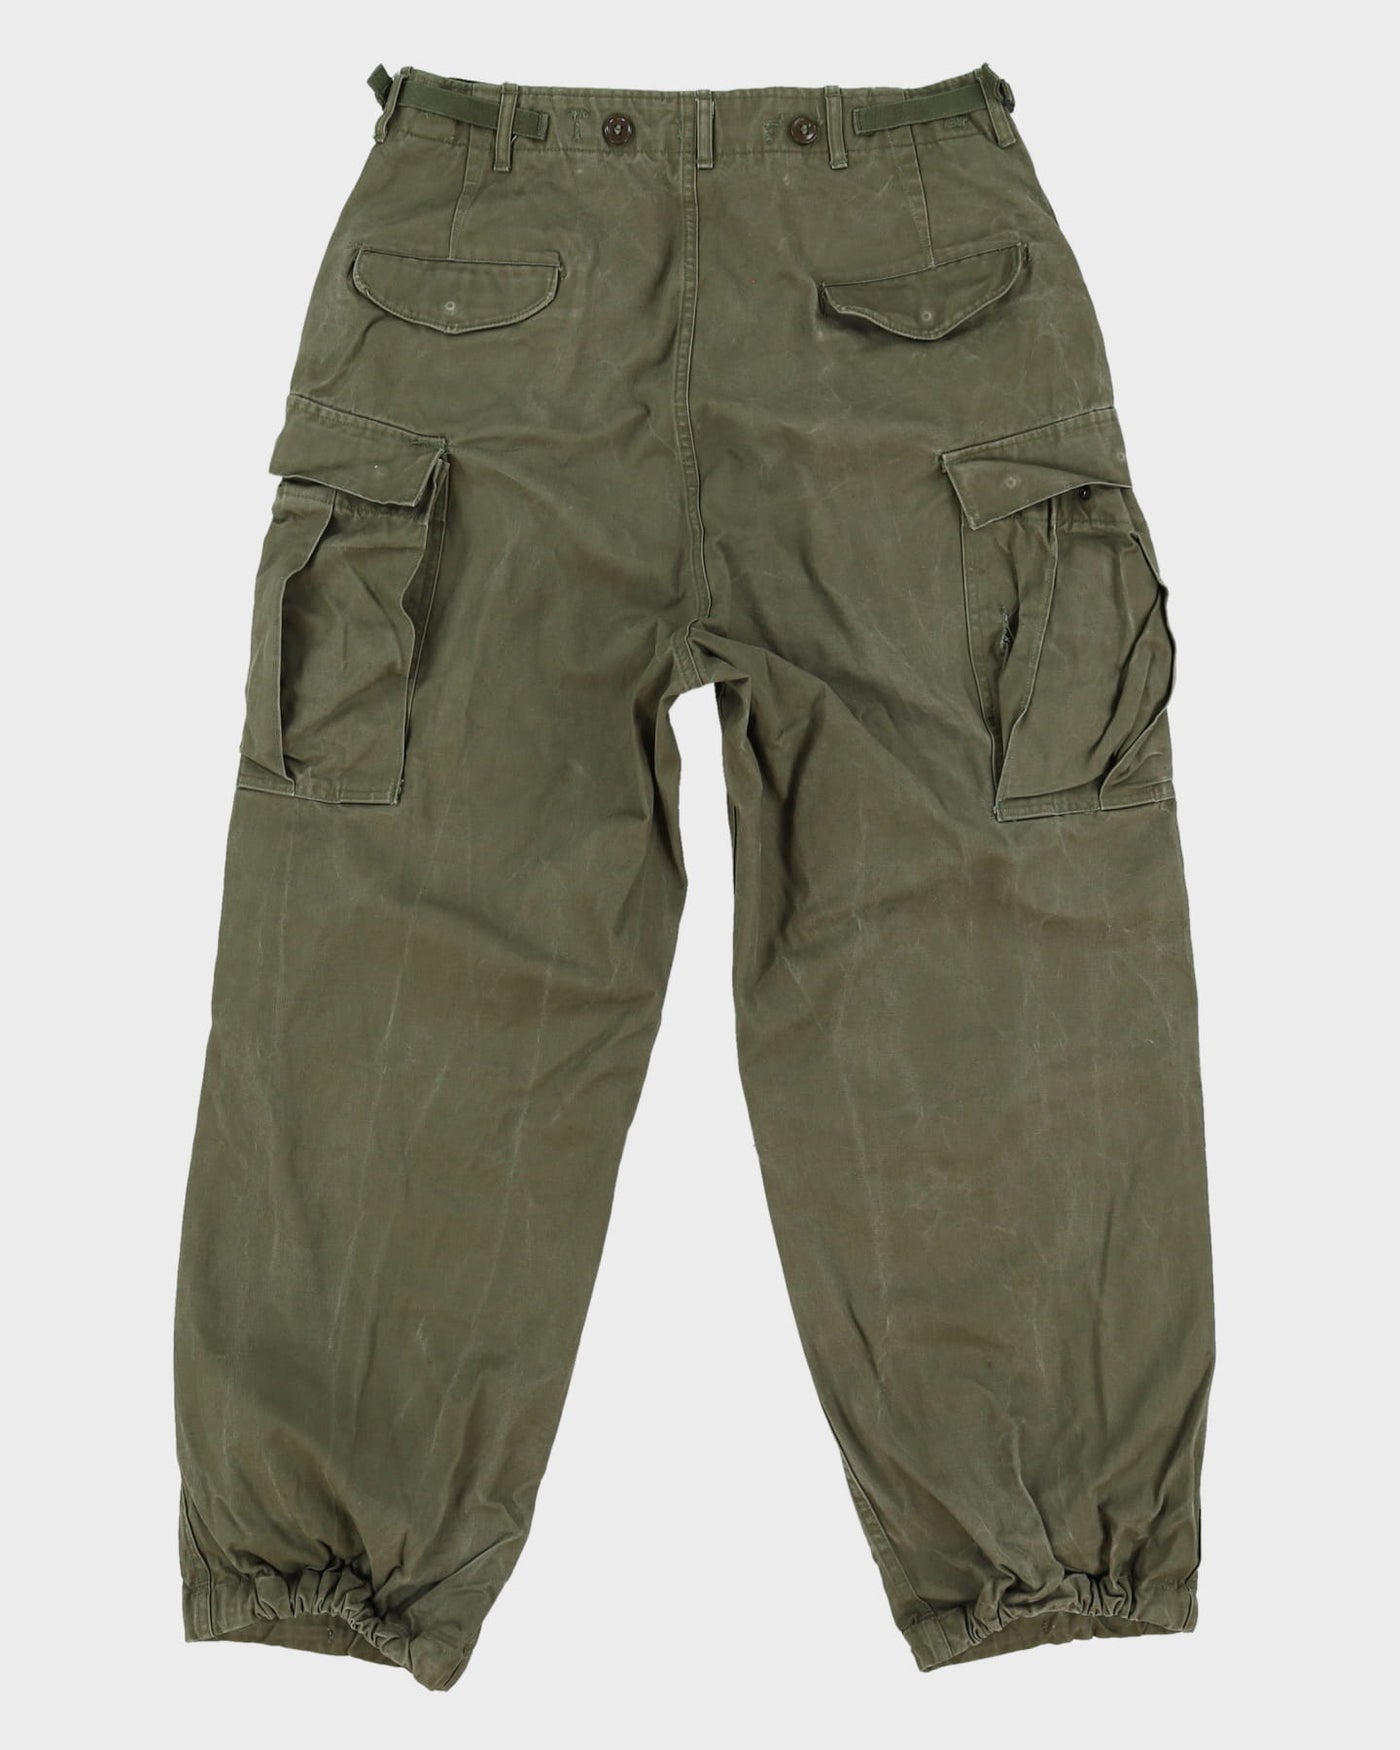 50s Vintage US Army M1951 Cold Weather Combat Trousers - 36x30